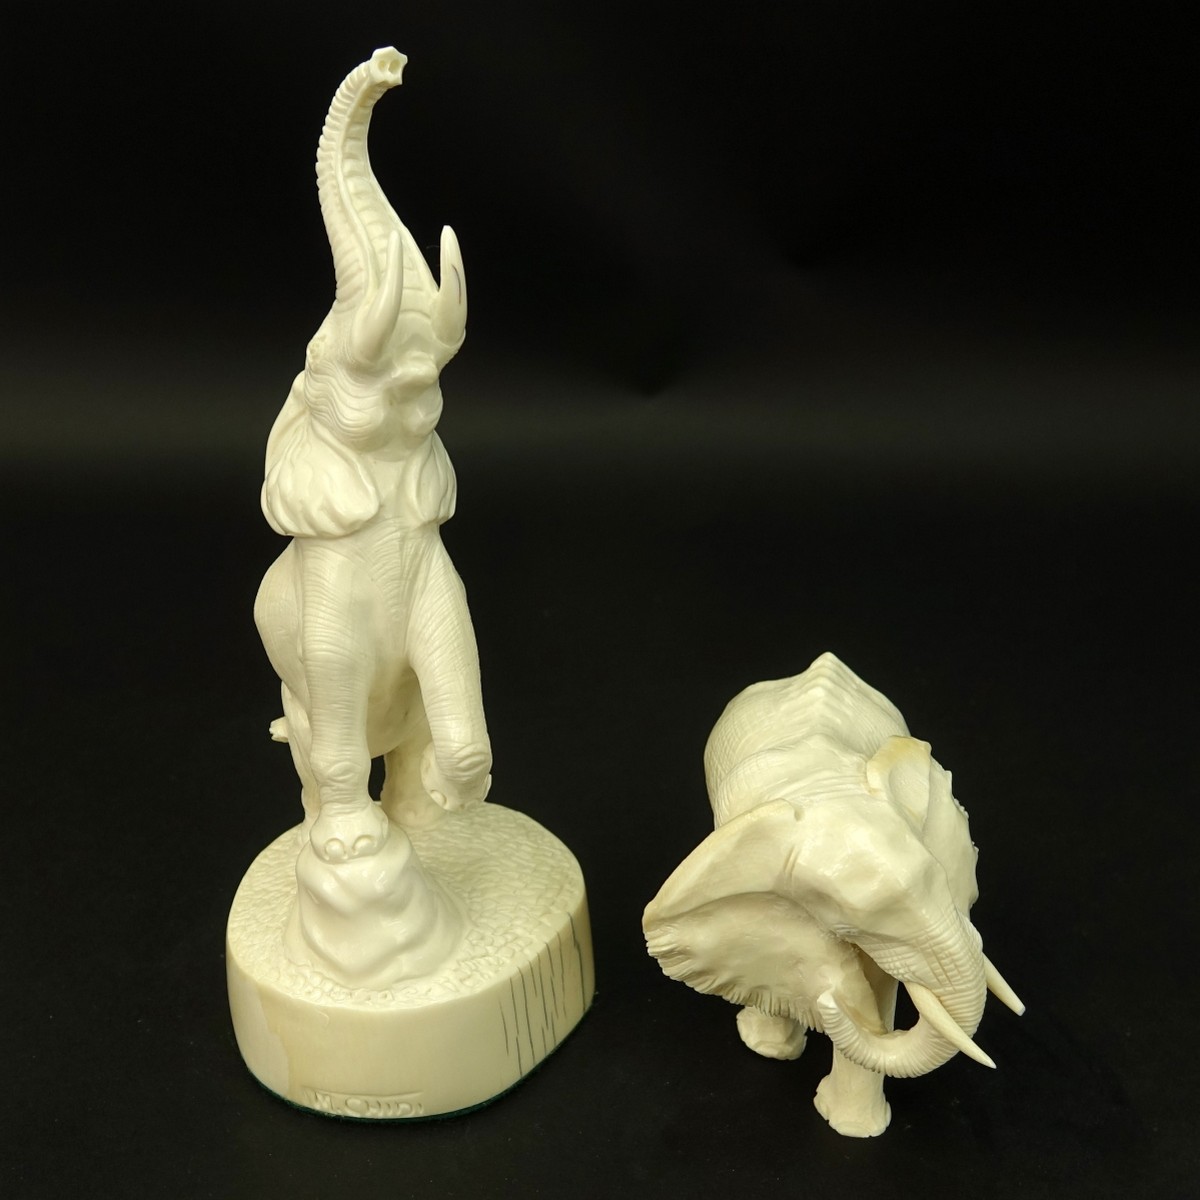 Two (2) African Carved Ivory Figurines